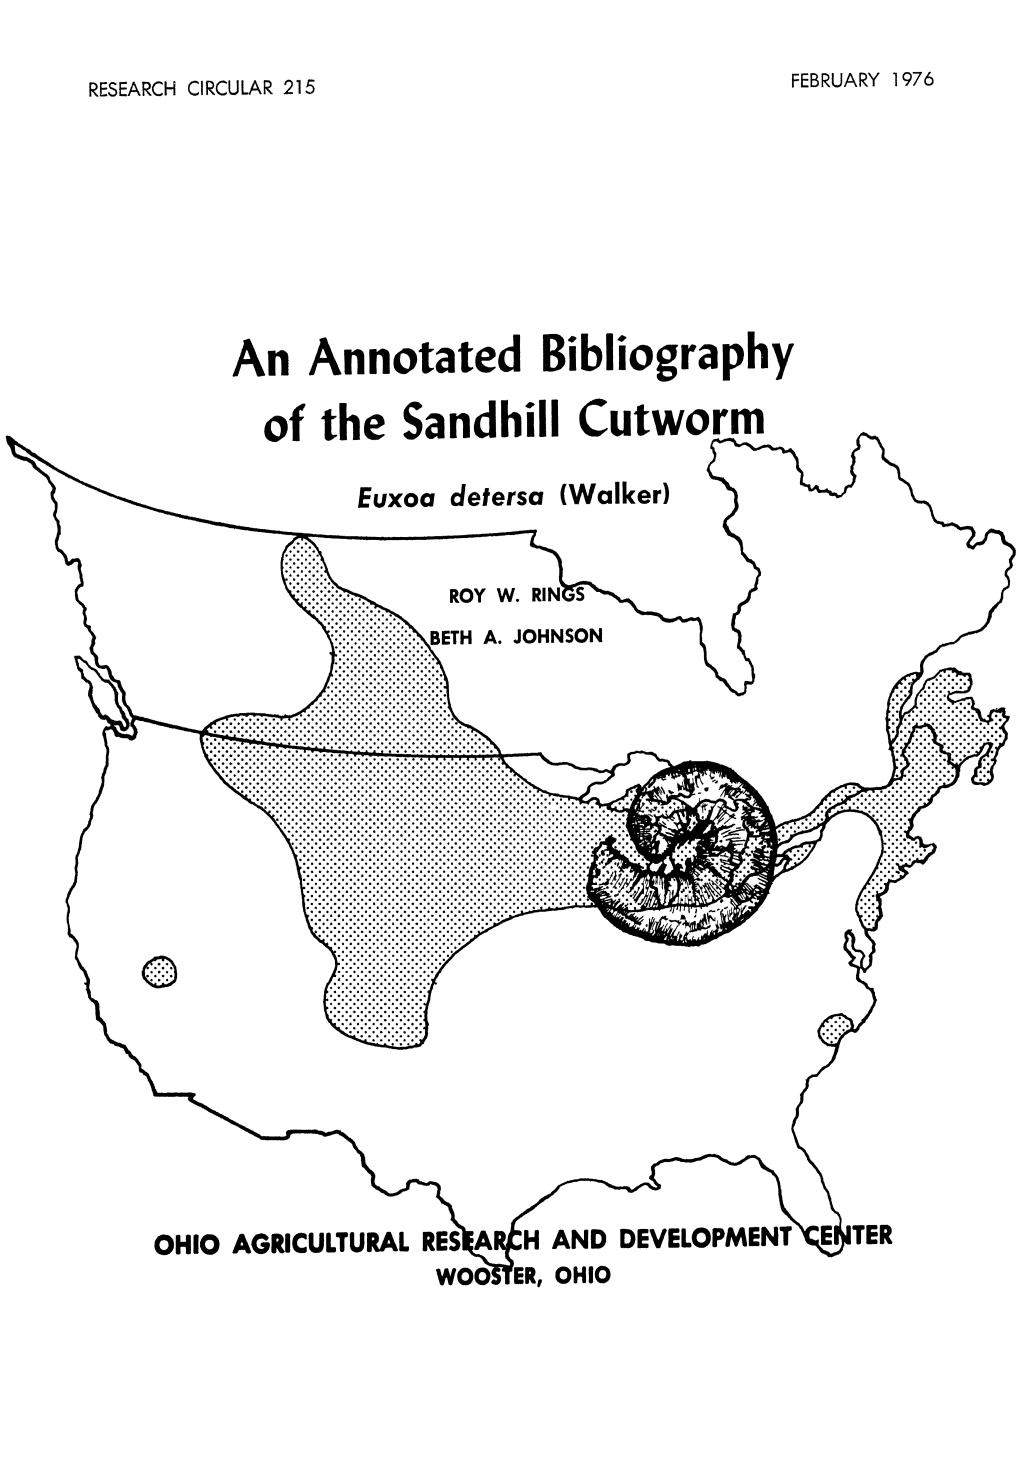 An Annotated Bibliography of the Sandhill Cutworm